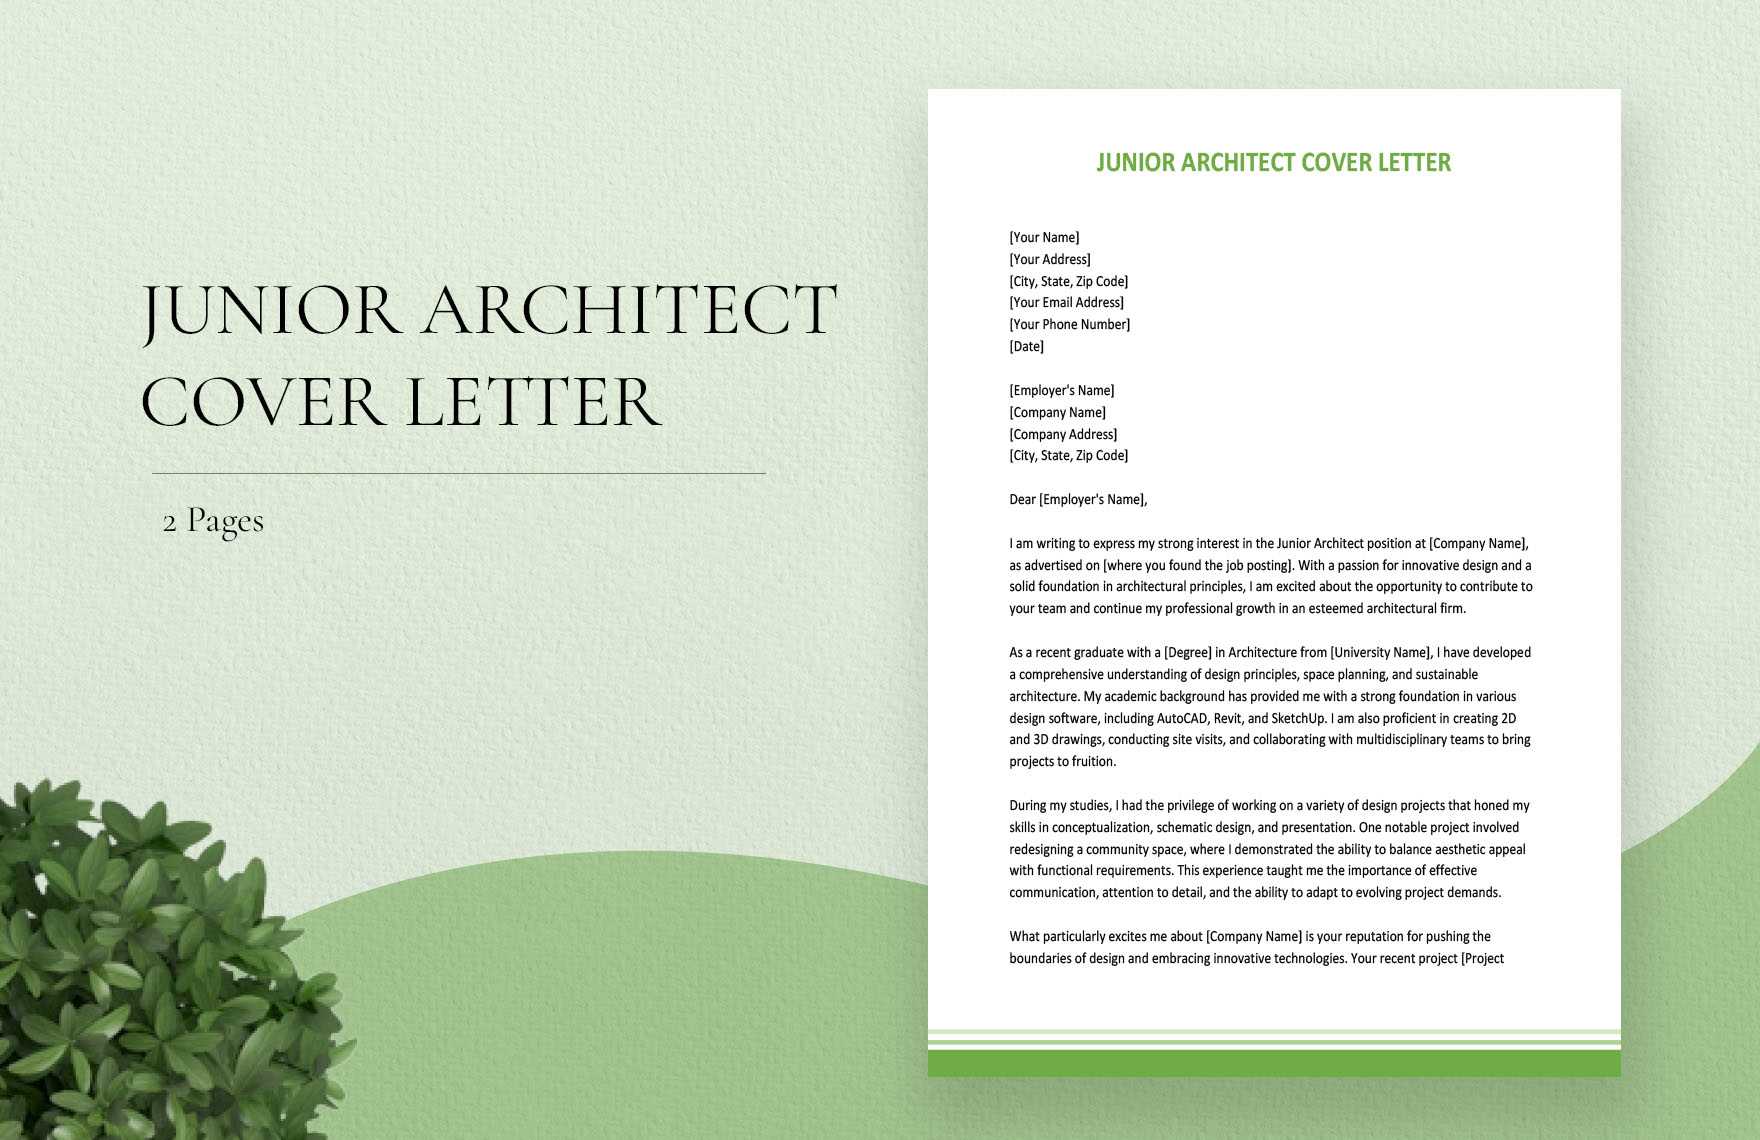 Junior Architect Cover Letter in Word, Google Docs